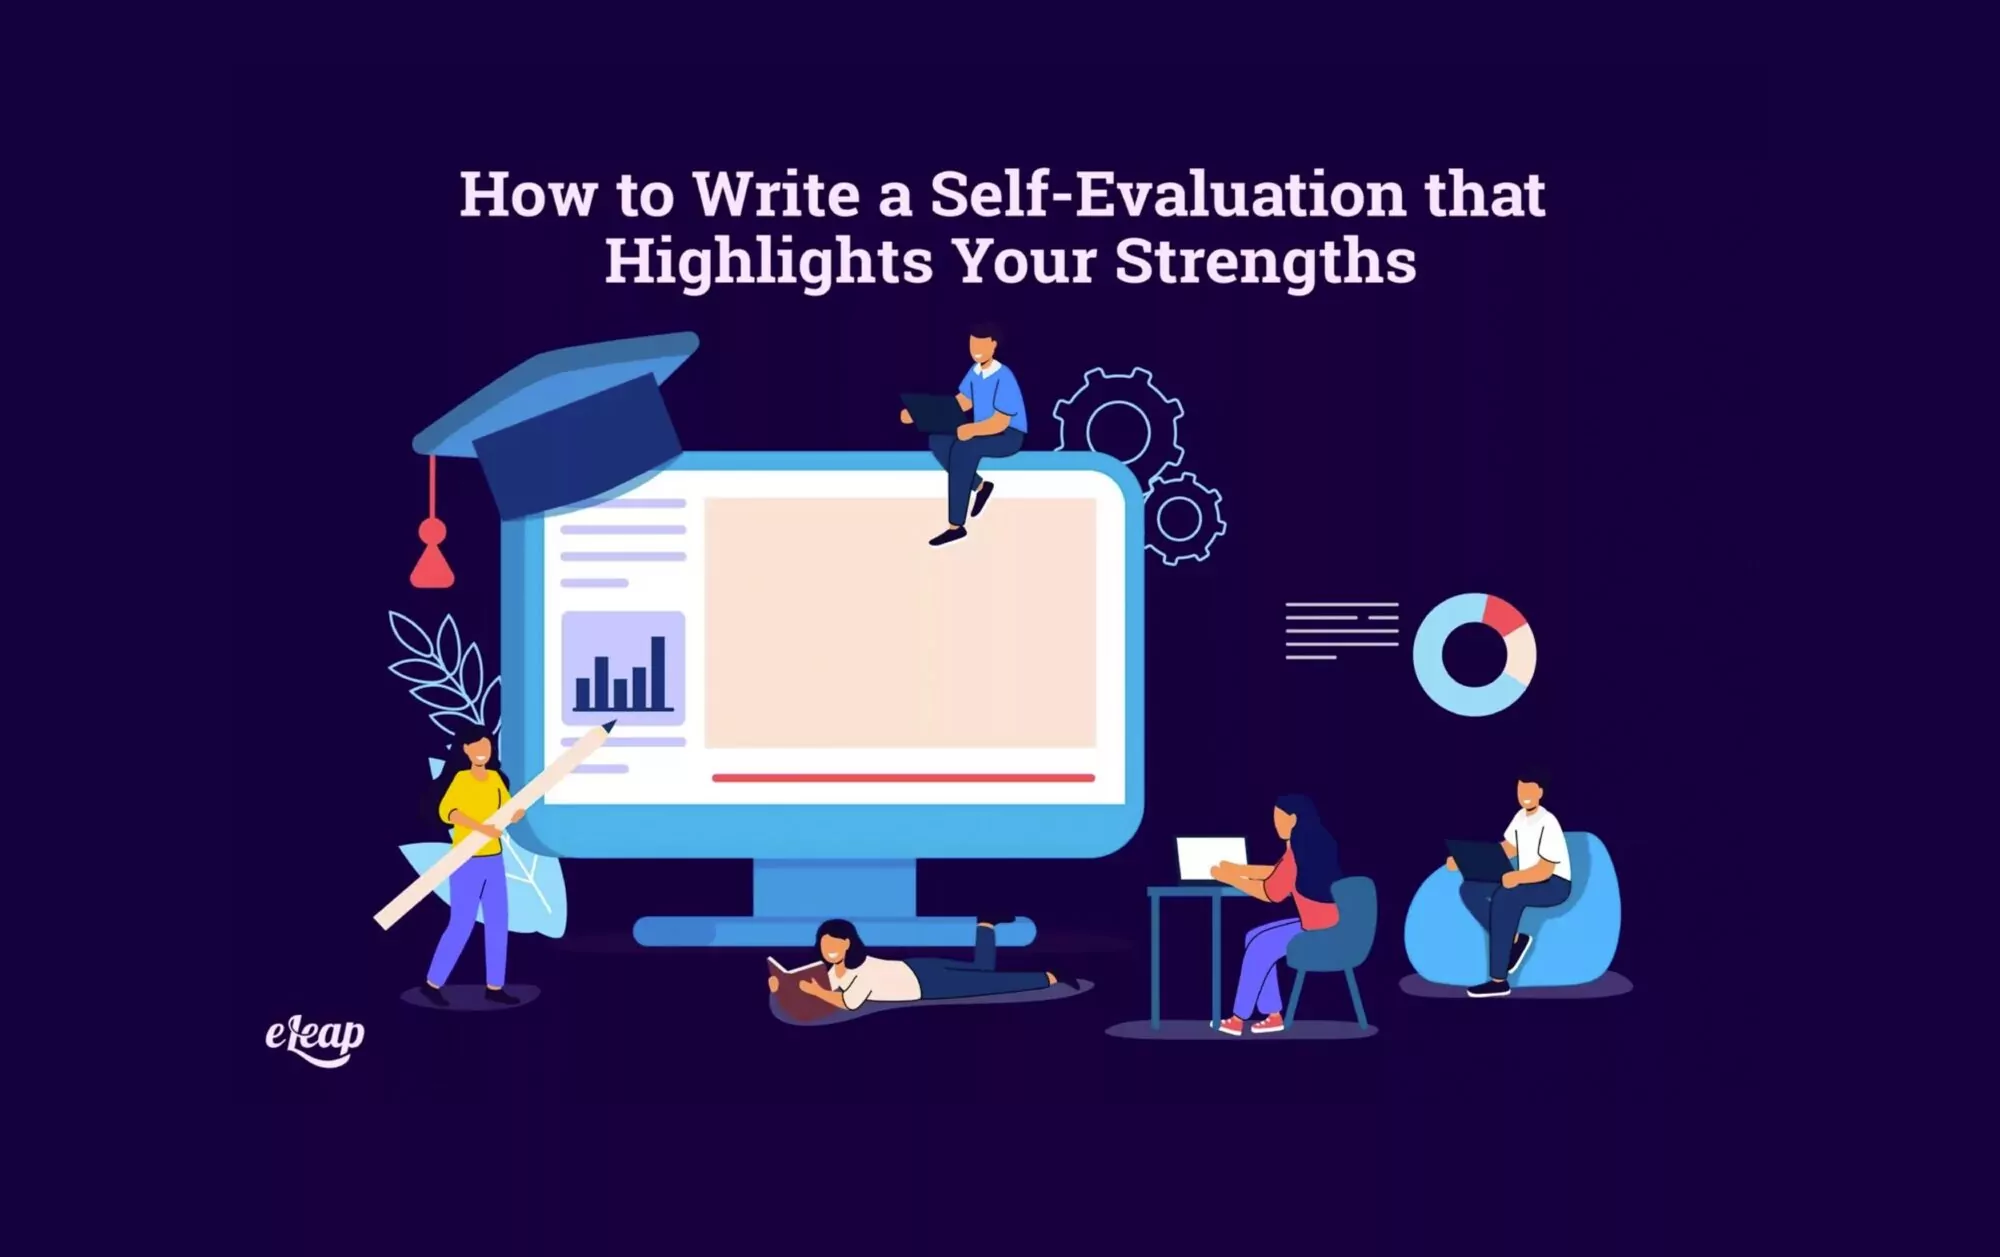 How to Write a Self-Evaluation that Highlights Your Strengths